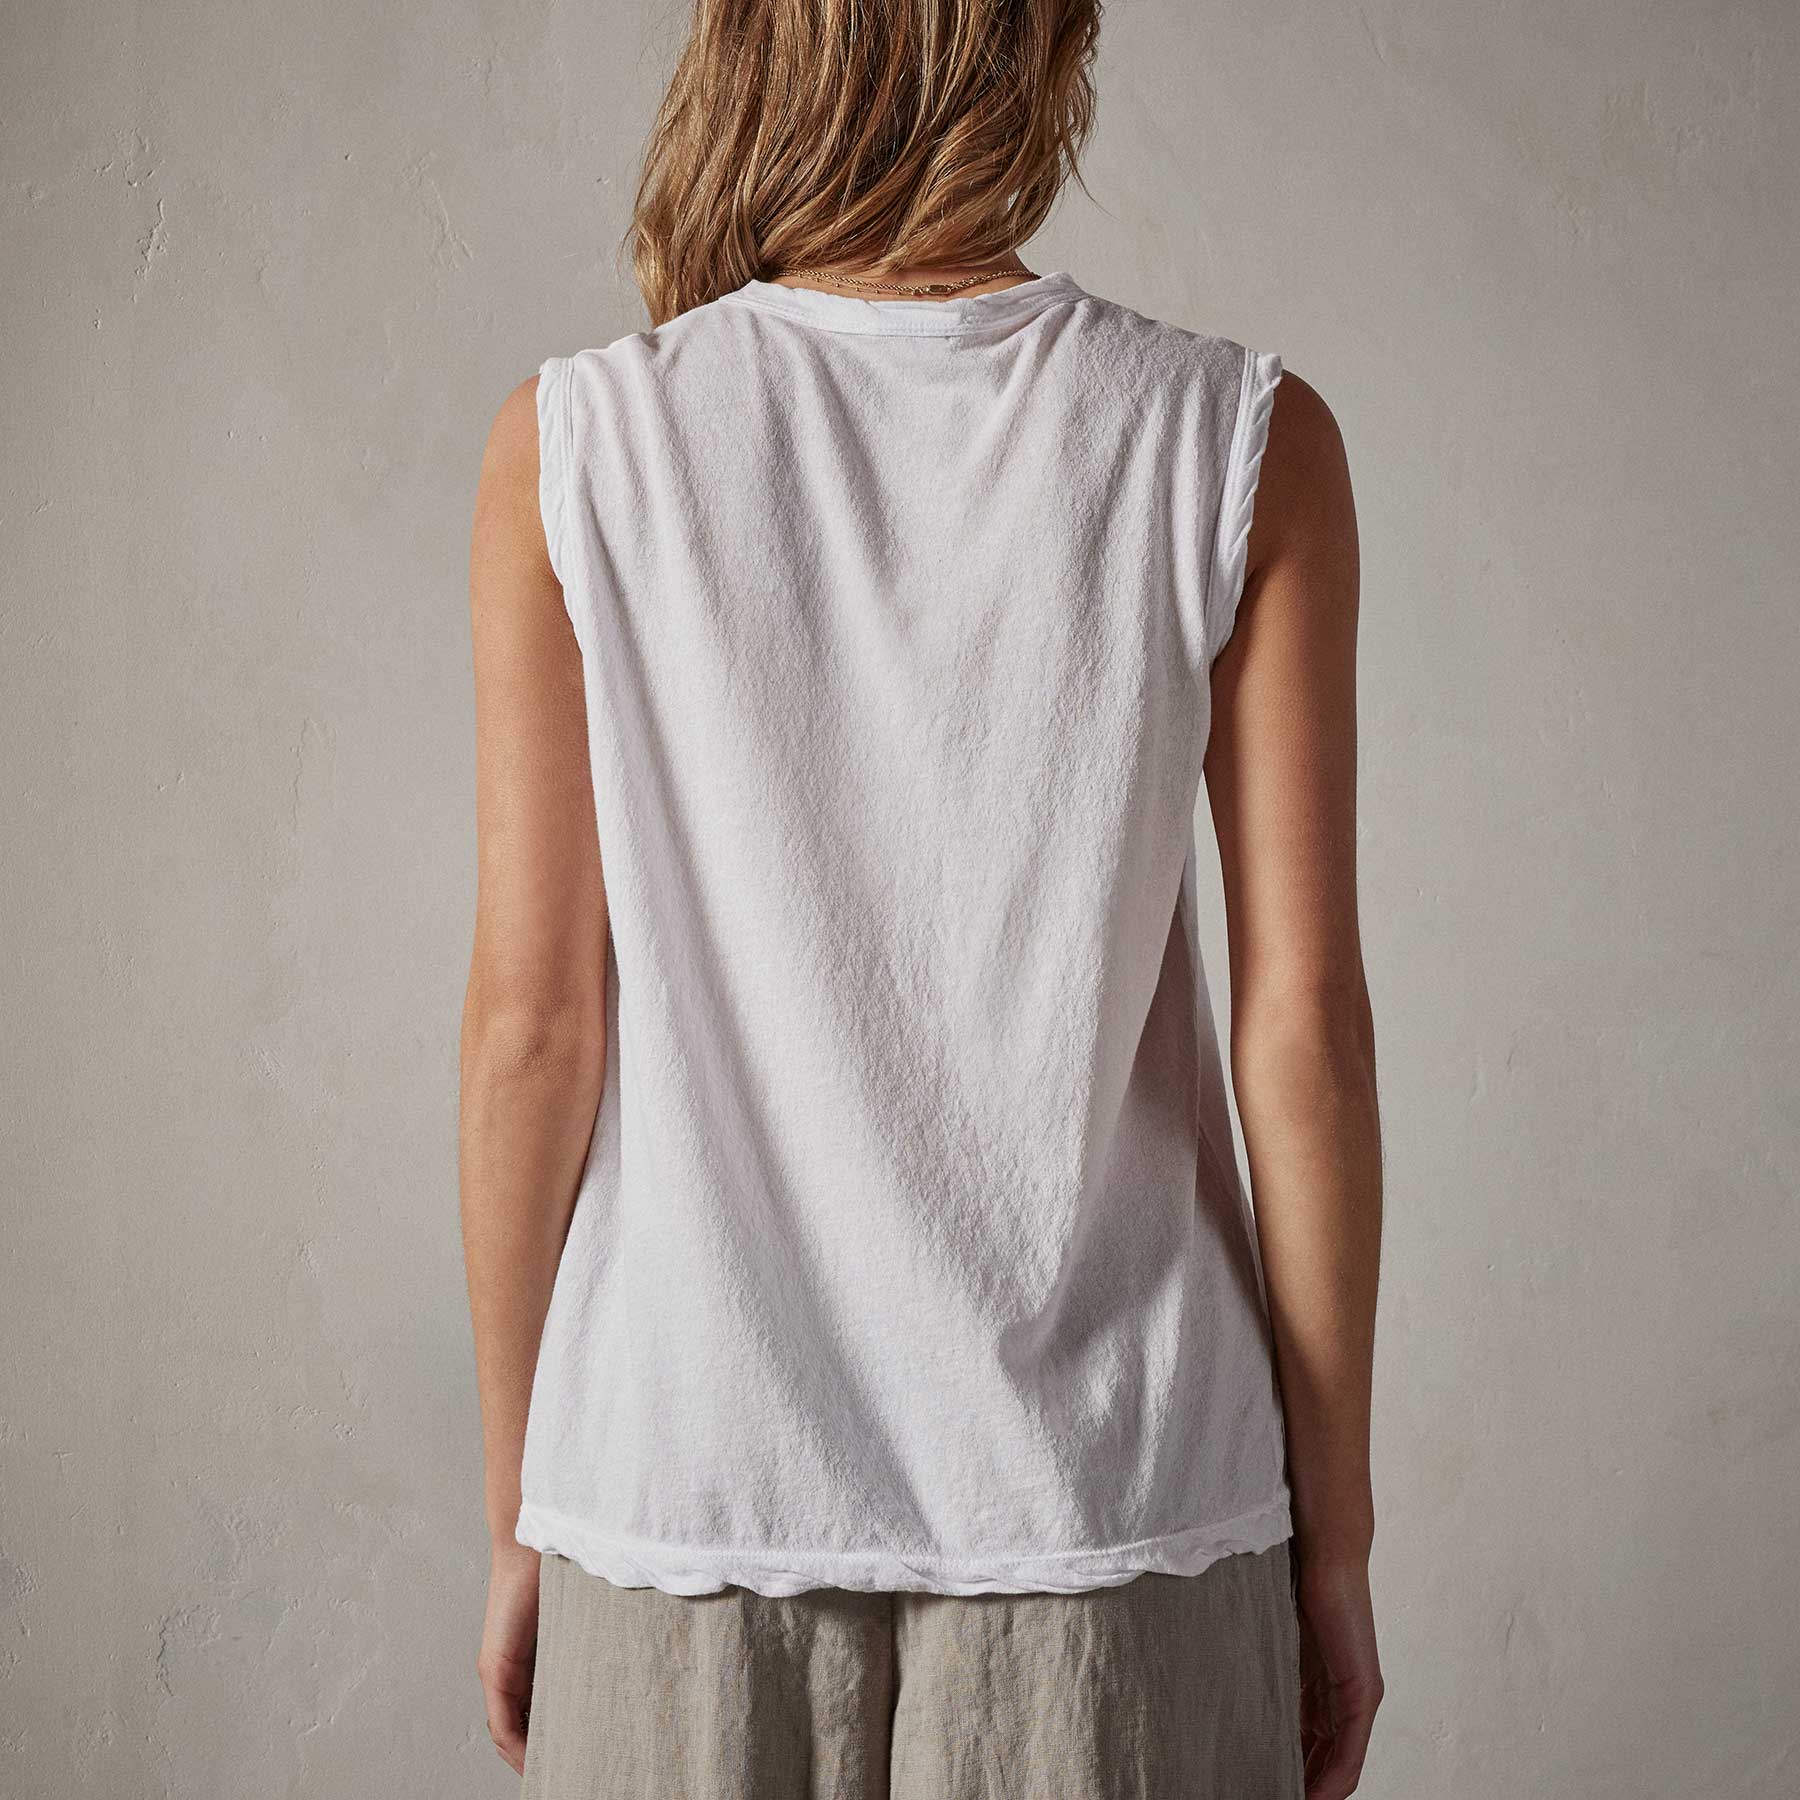 JAMES PERSE Relaxed Fit Jersey Muscle Tank in White 1/S